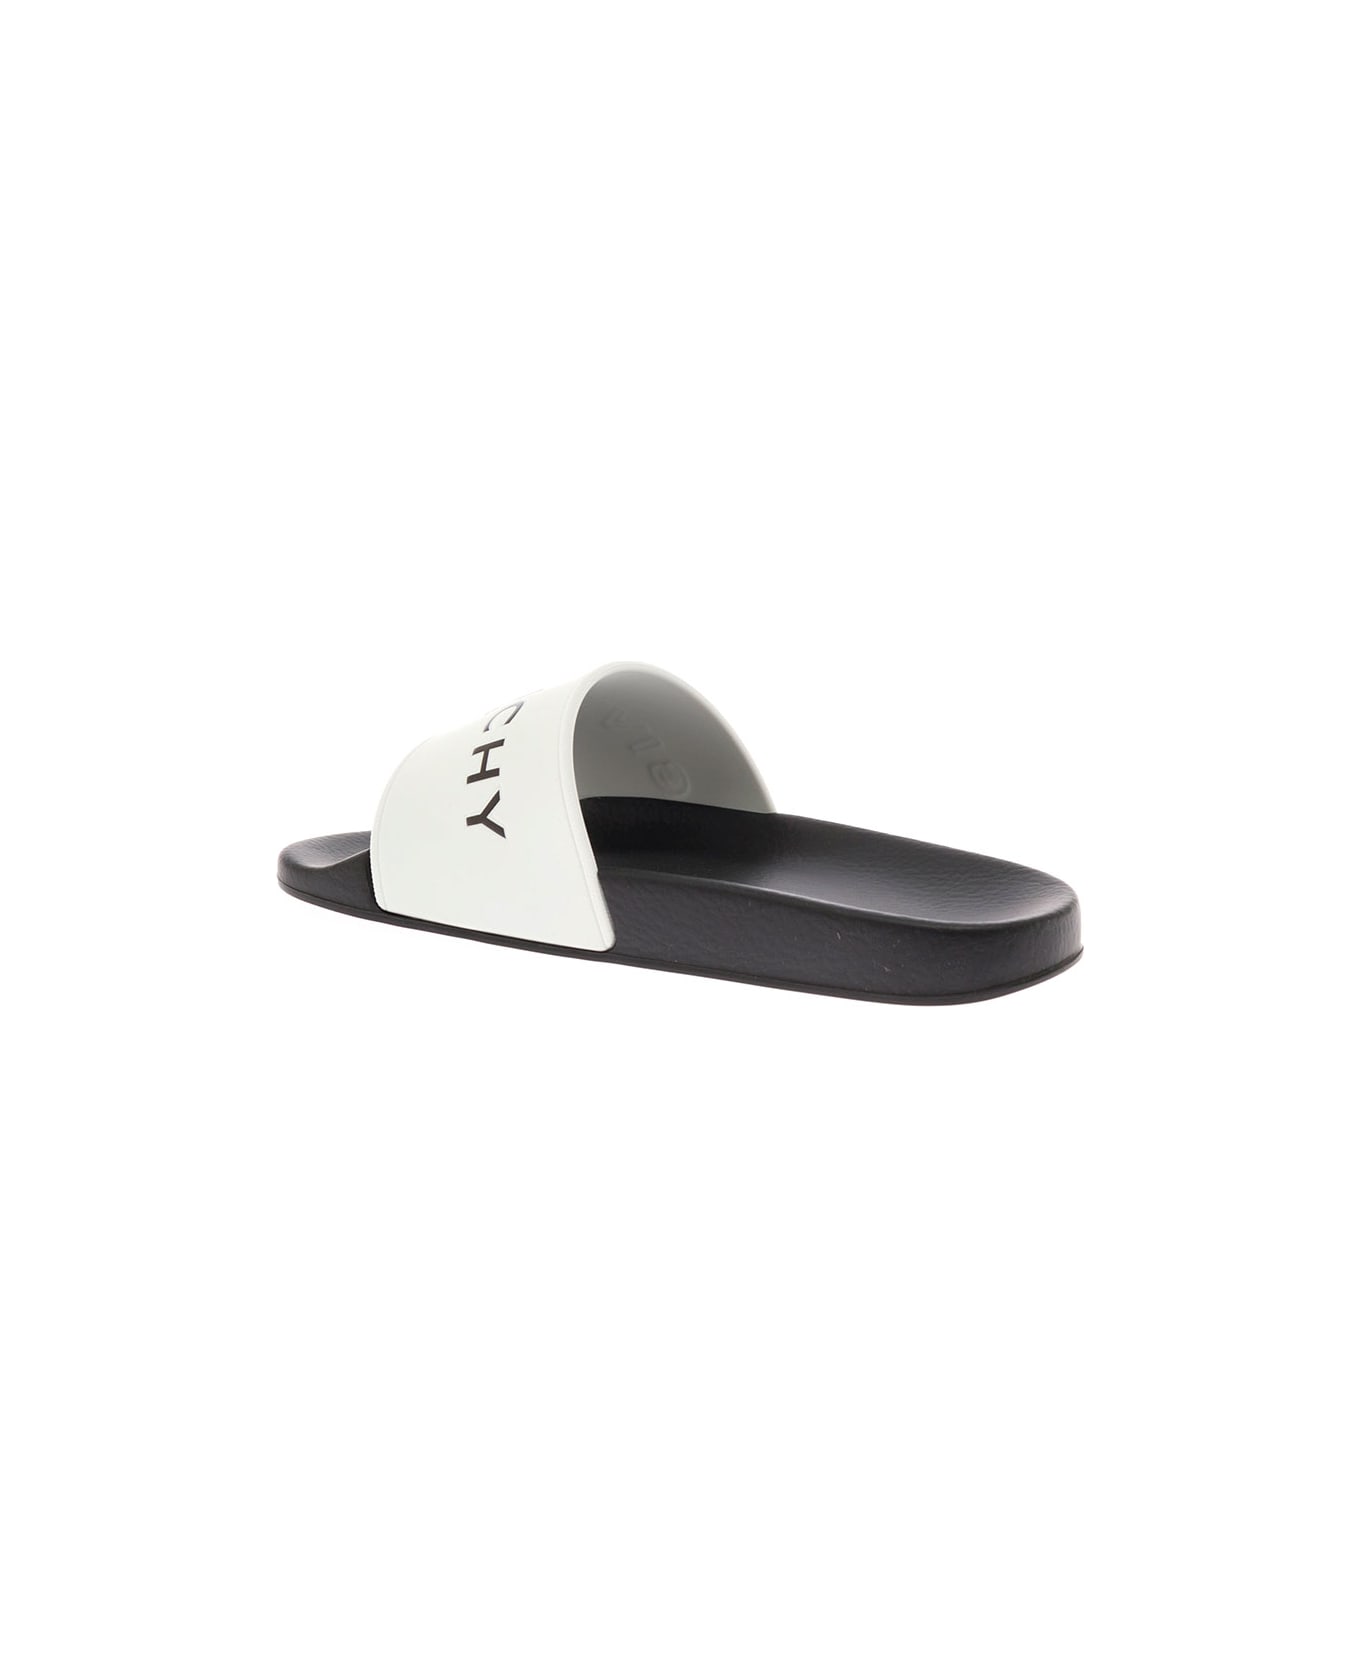 Givenchy Black And White Slide Rubber Sandals With Logo  Givenchy Kids Boy - White